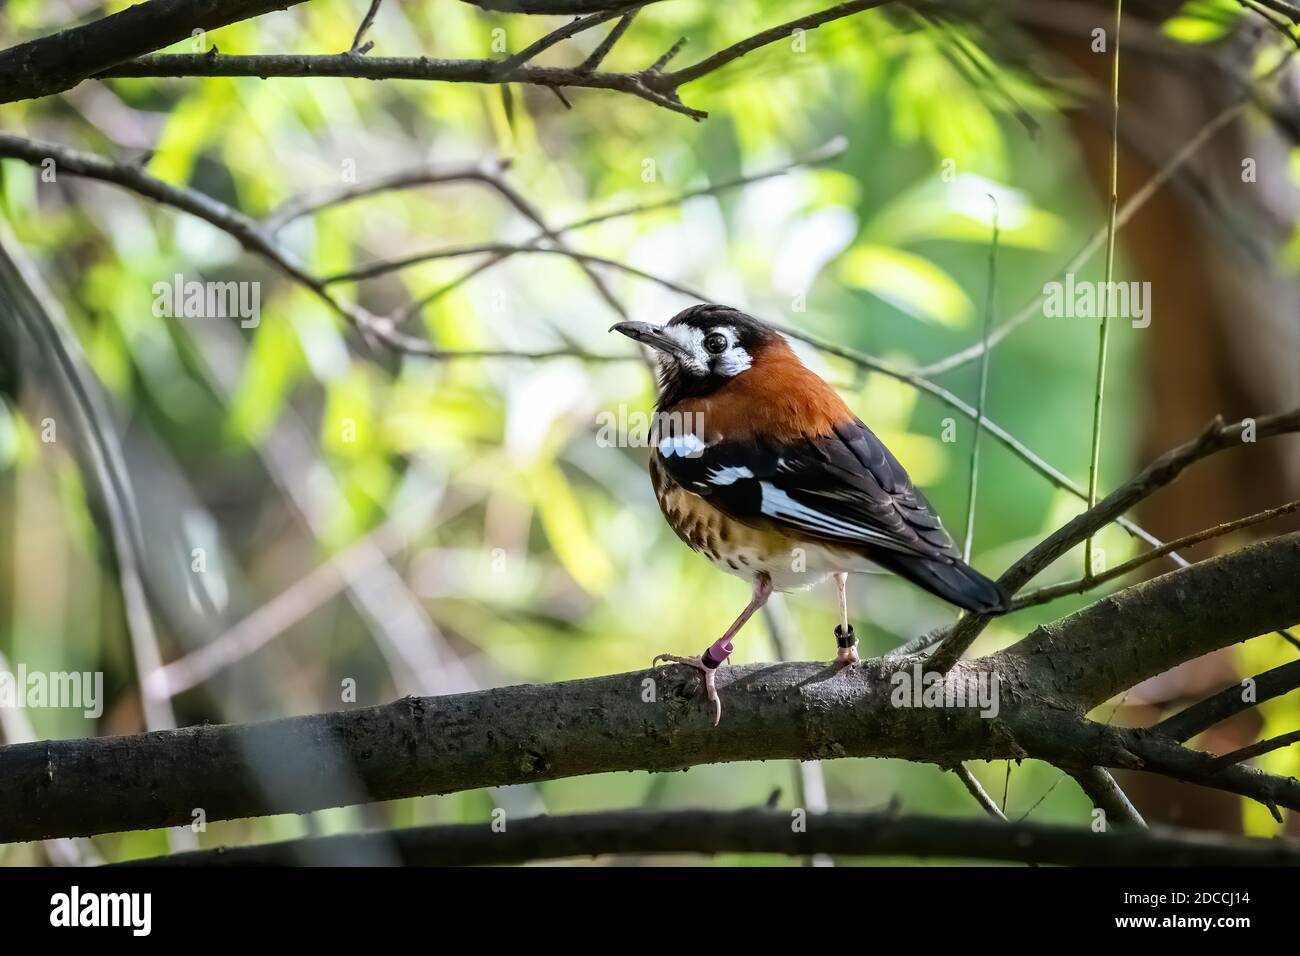 Chestnut-backed thrush, Geokichla dohertyi, perched on a branch. Indigenous to Lombok, Timor and the Lesser Sunda Islands in Indonesia. Captive breedi Stock Photo